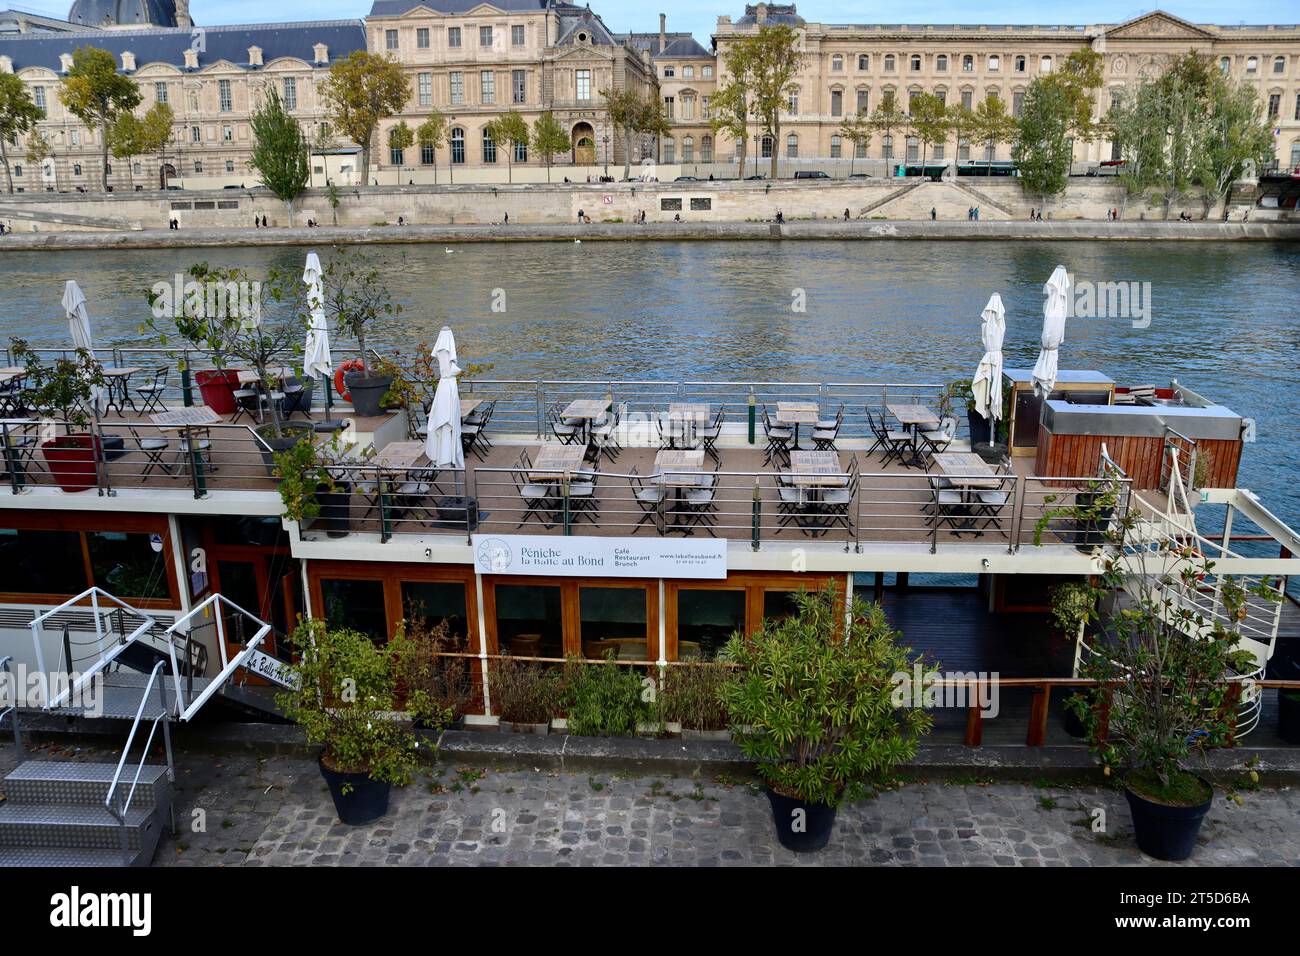 Peniche la Balle ou Bond floating restaurant on Seine river with Louvre Museum on opposite shore in Paris, France Stock Photo